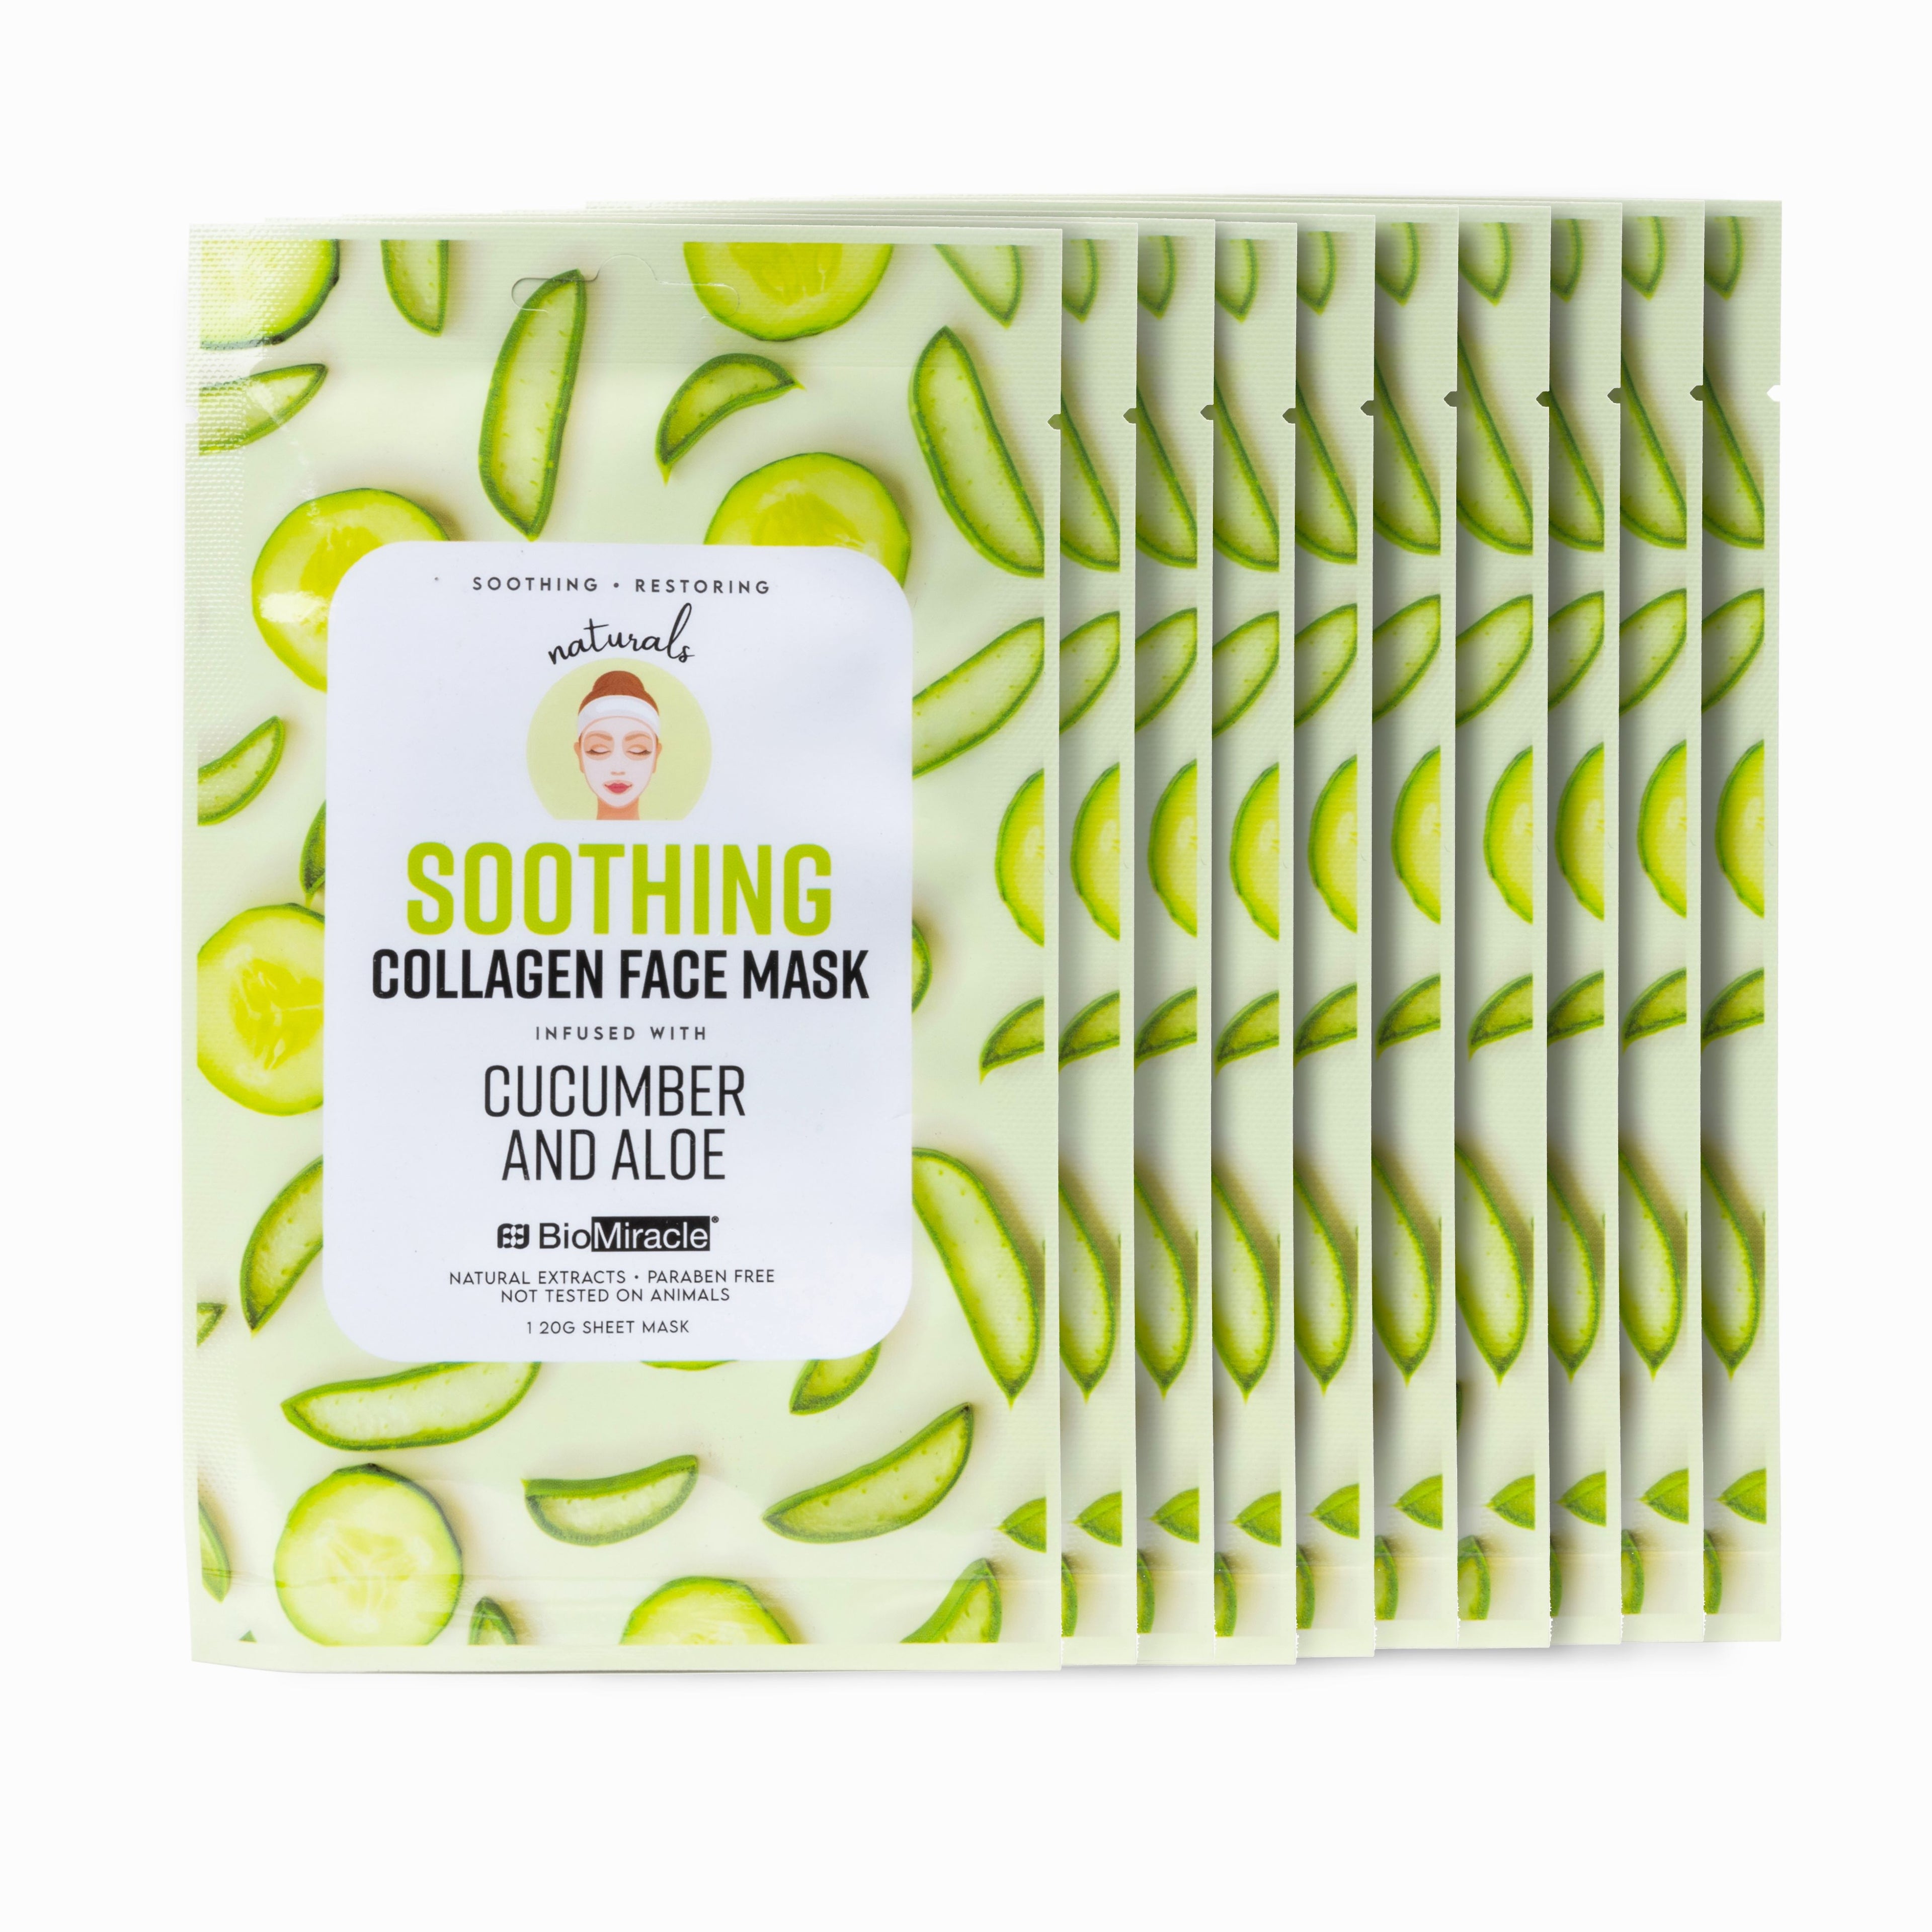 Soothing Collagen Face Mask Infused with Cucumber and Aloe 10 Pack